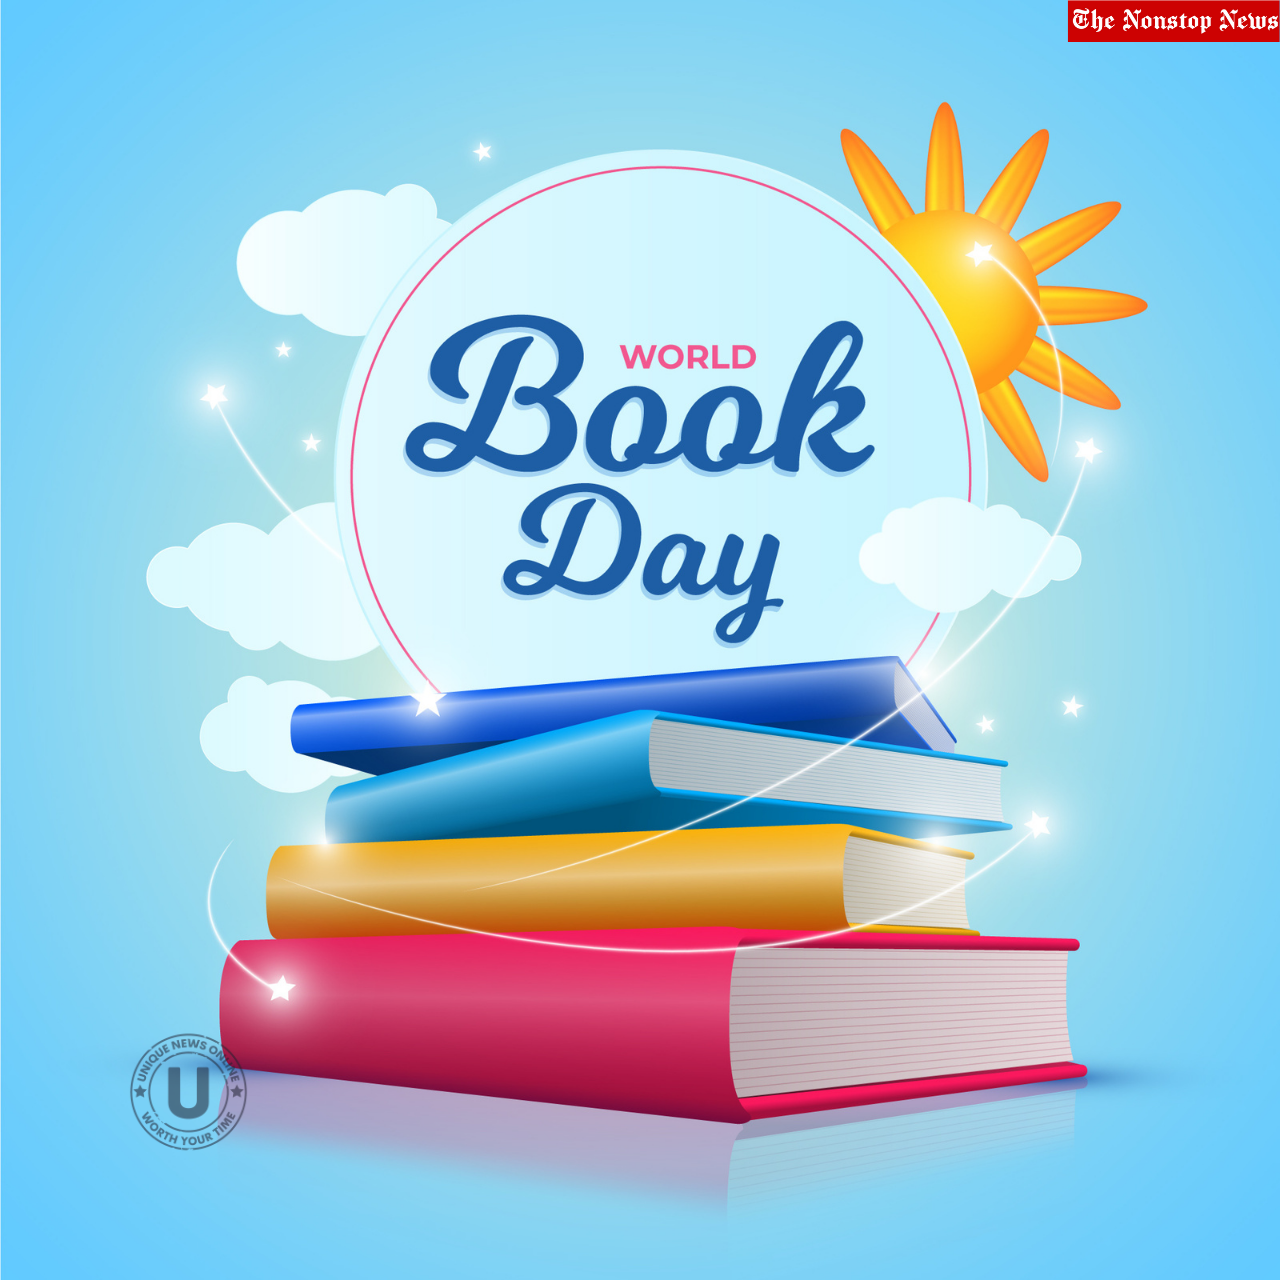 World Book Day 2022: Best Quotes, Messages, Posters, Wishes, Images, Greetings, Drawing to Promote Reading, Publishing, and Copyright